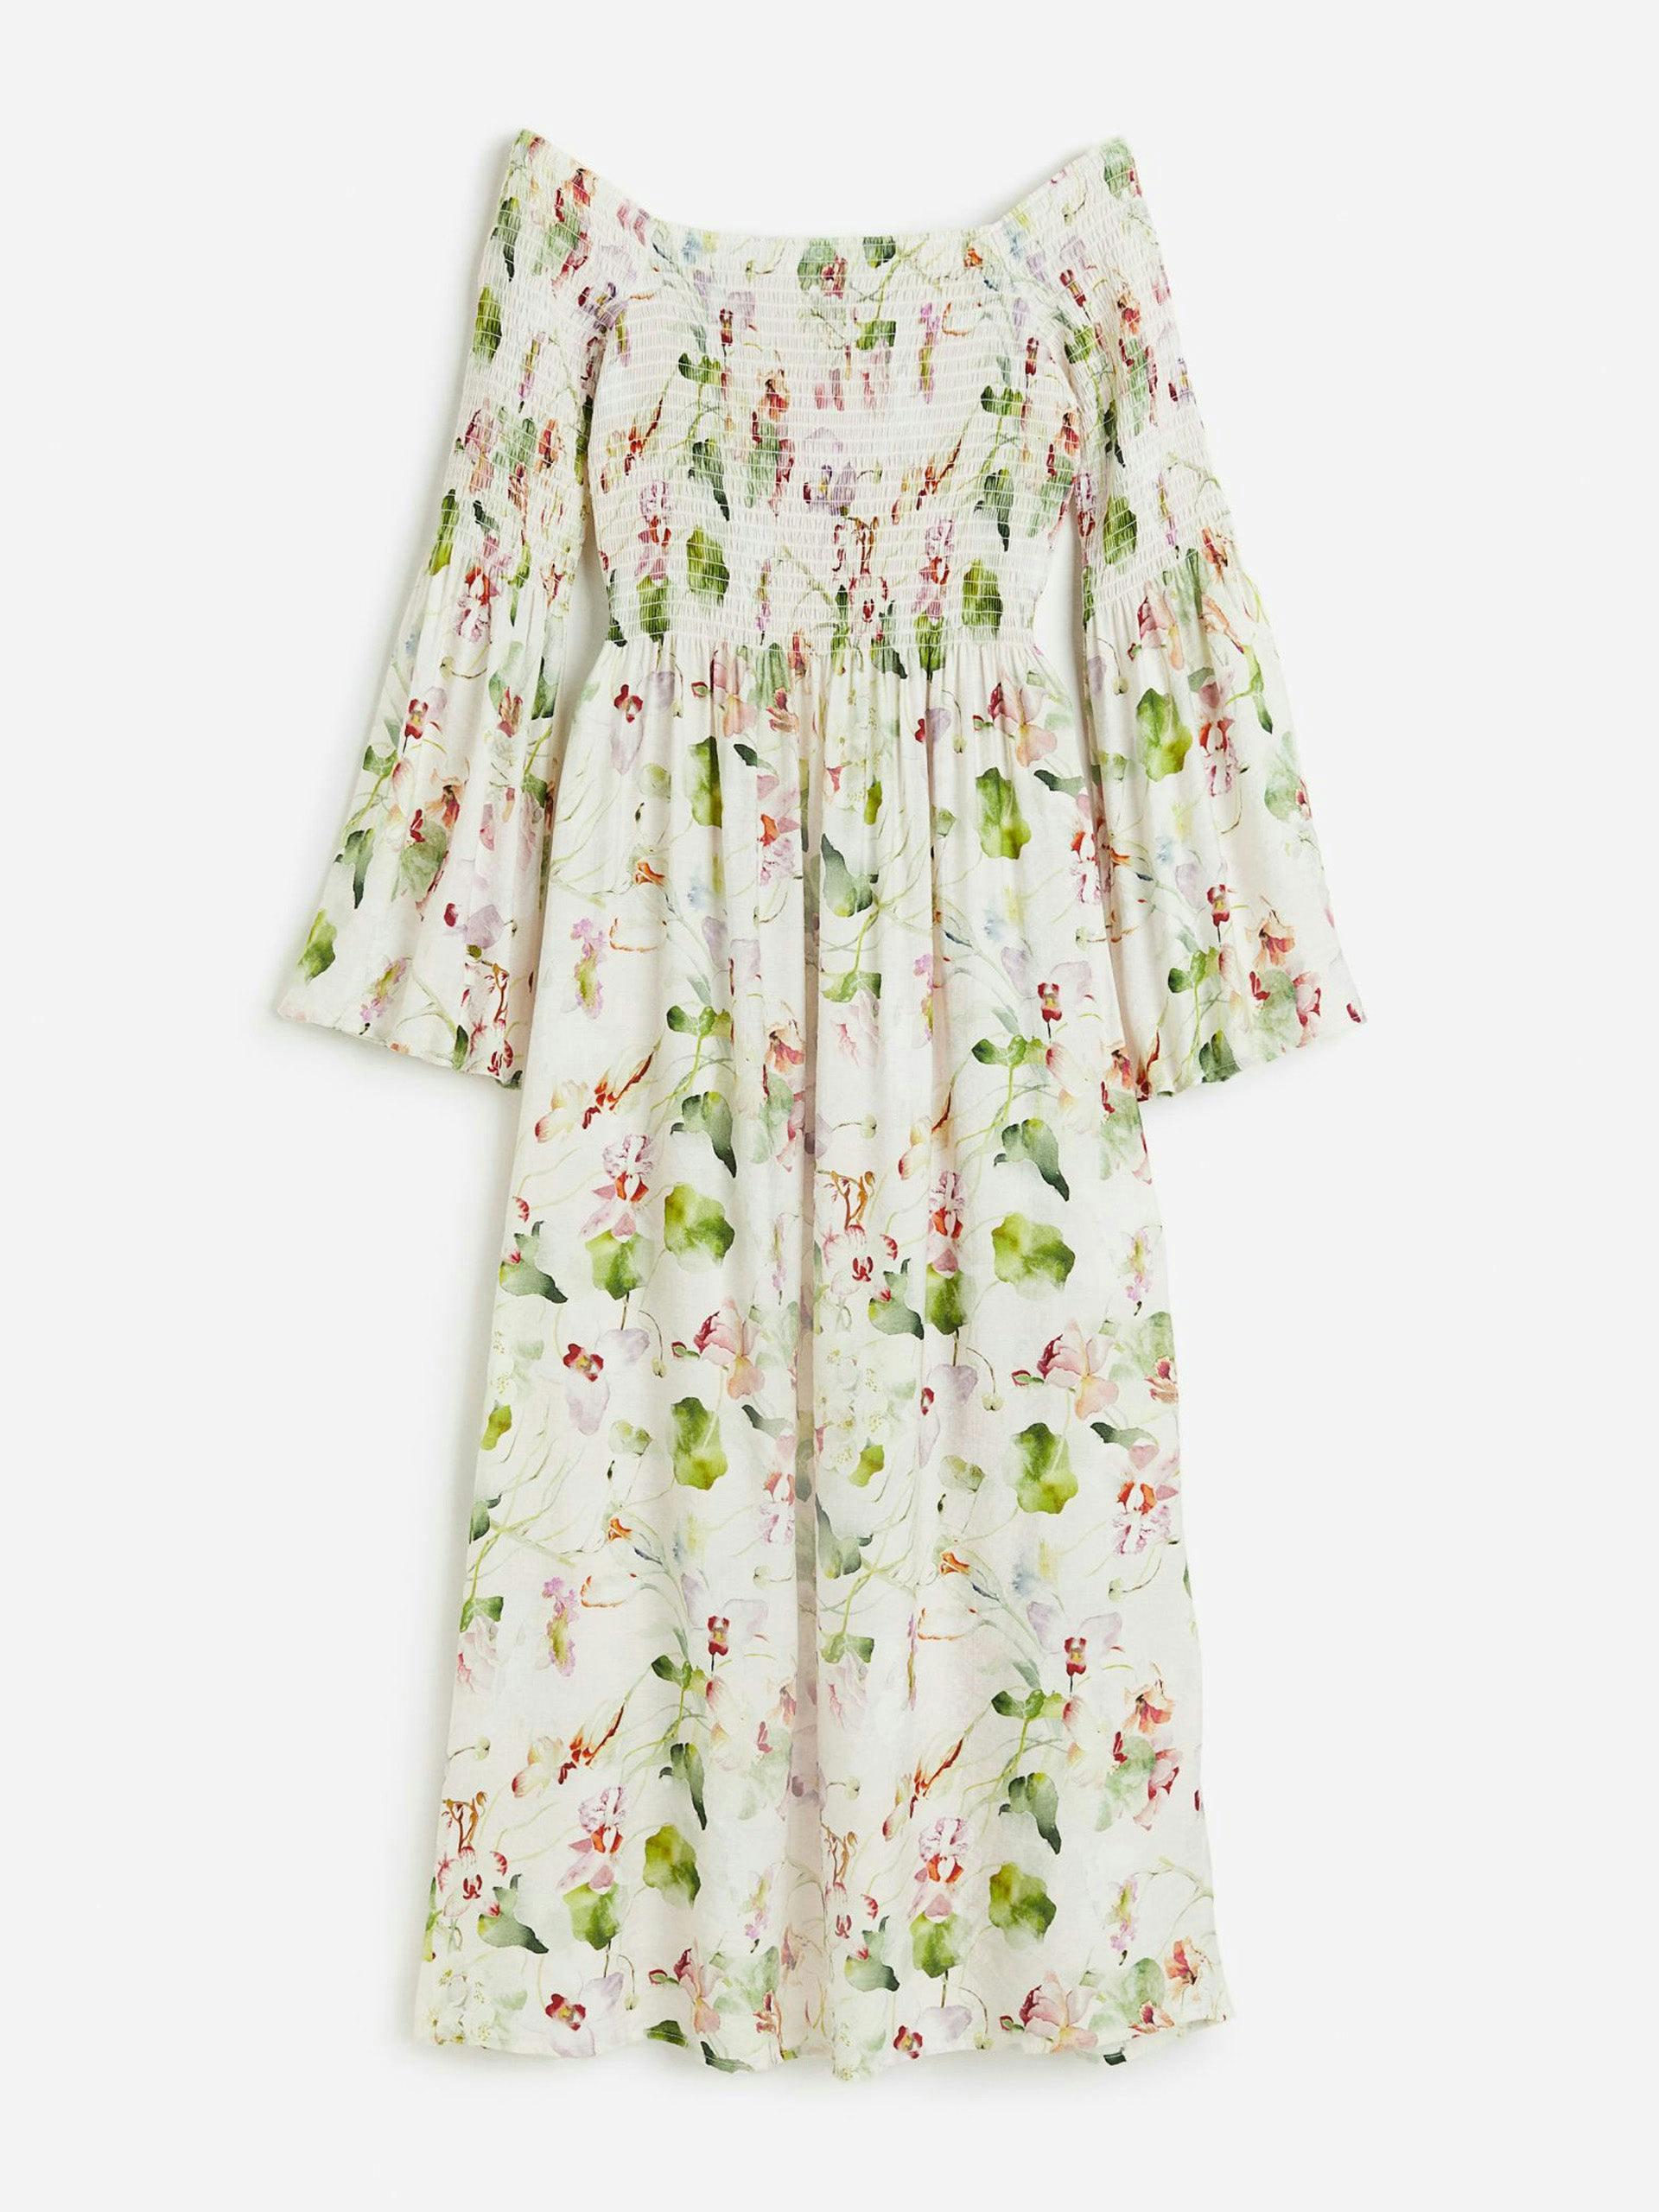 Cream floral smock-topped dress